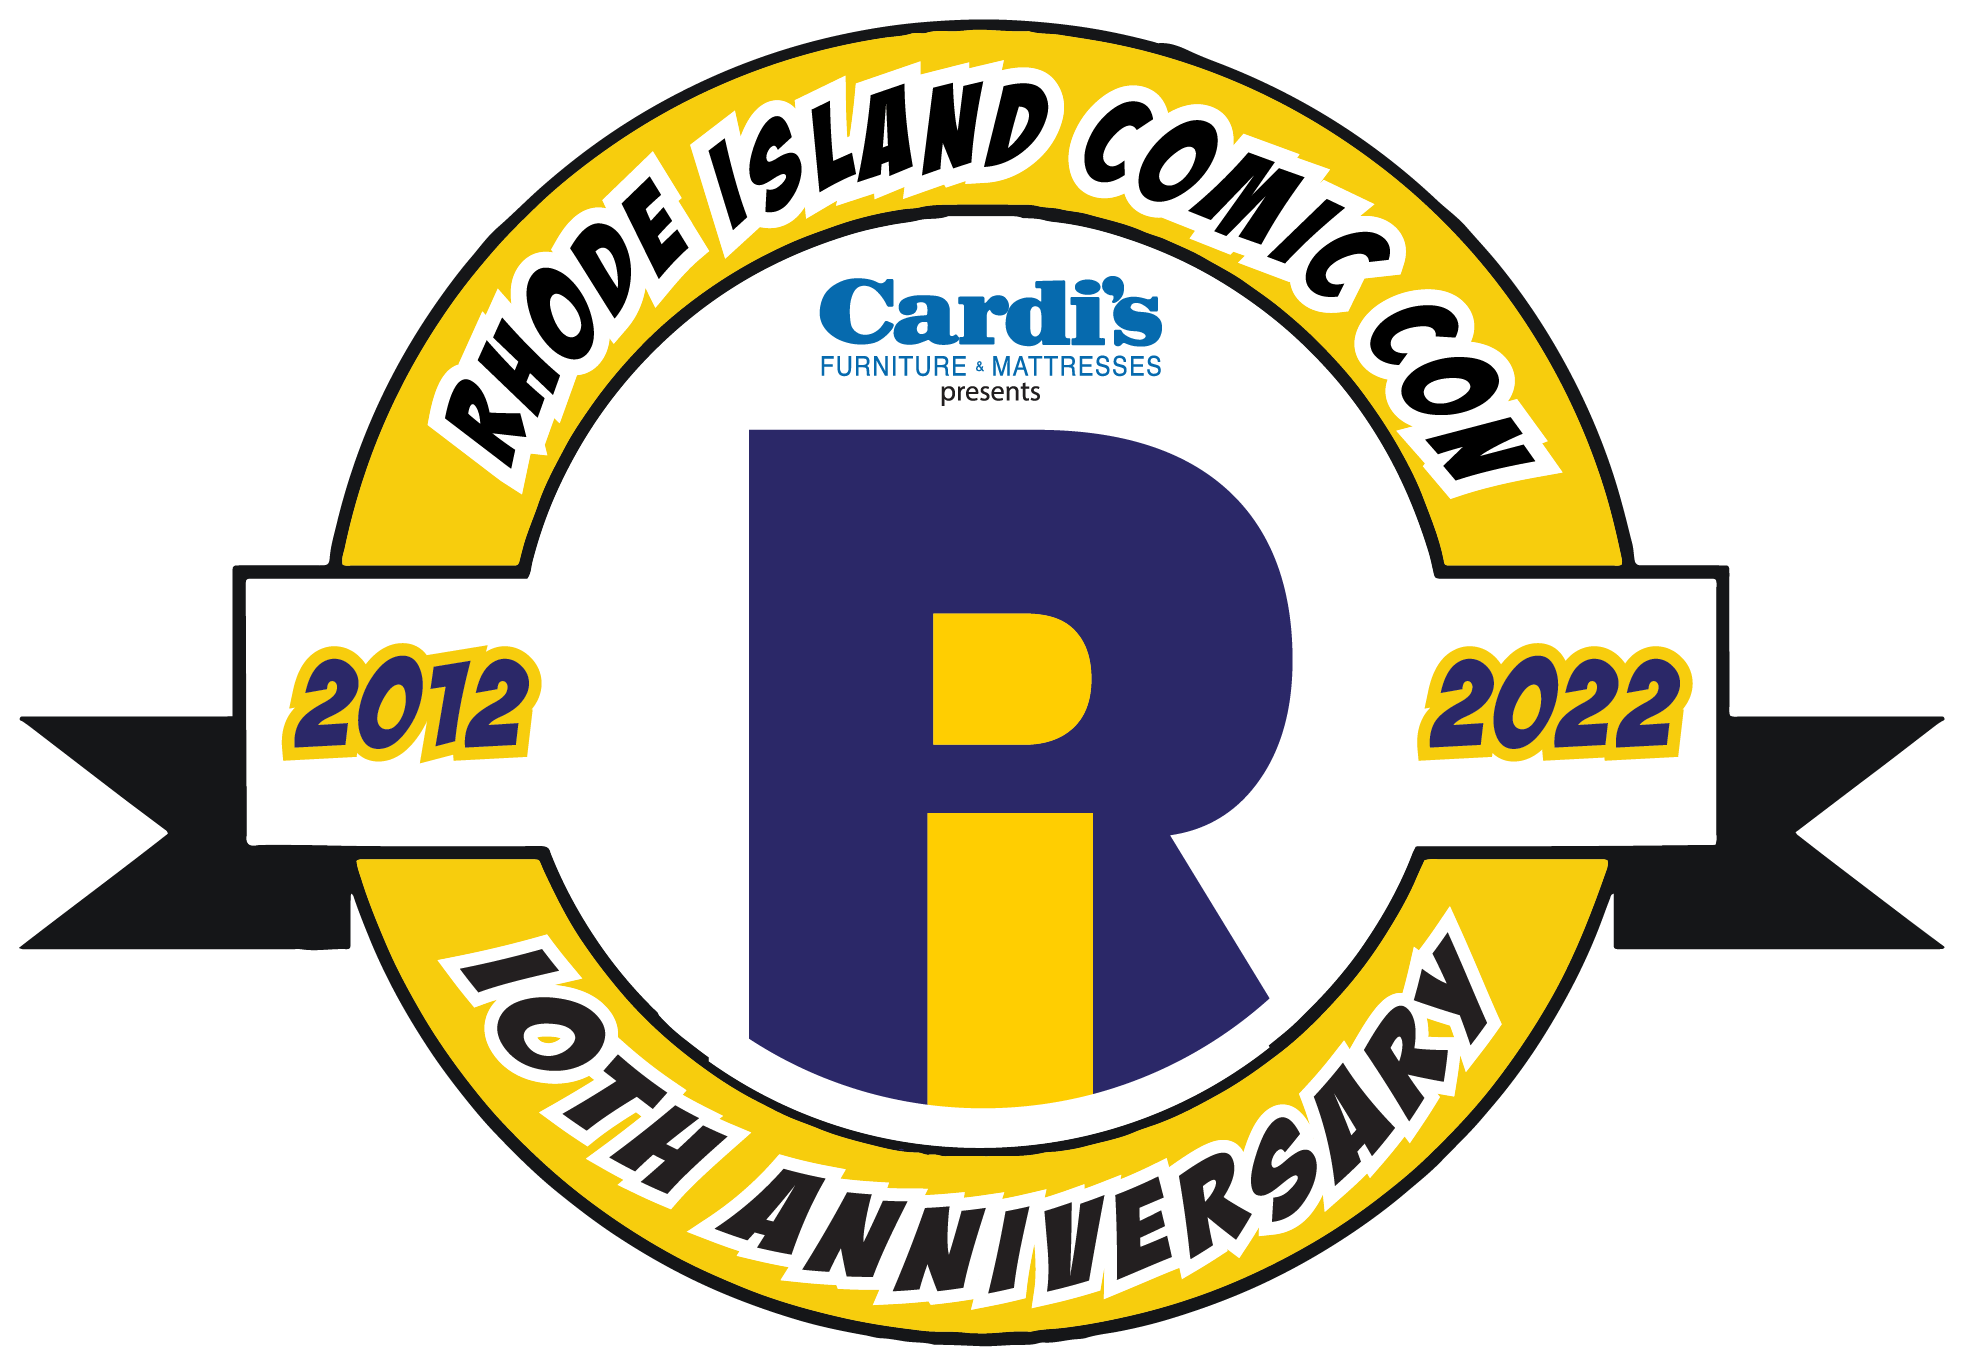 Jared and Genevieve Padalecki to Appear at Rhode Island Comic Con